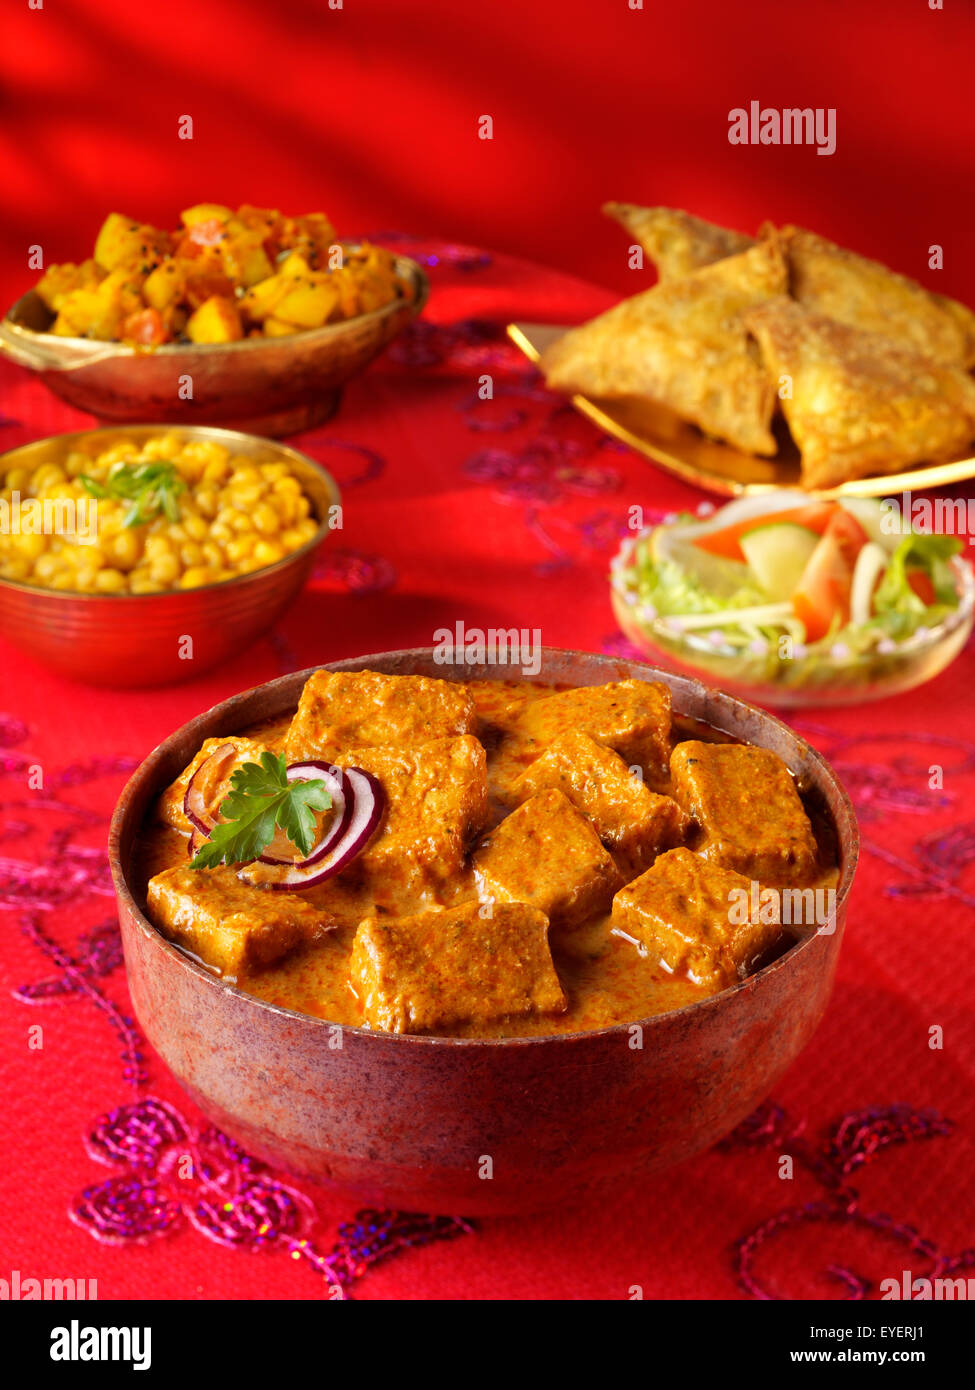 SHAHI PANEER CURRY INDIEN Banque D'Images